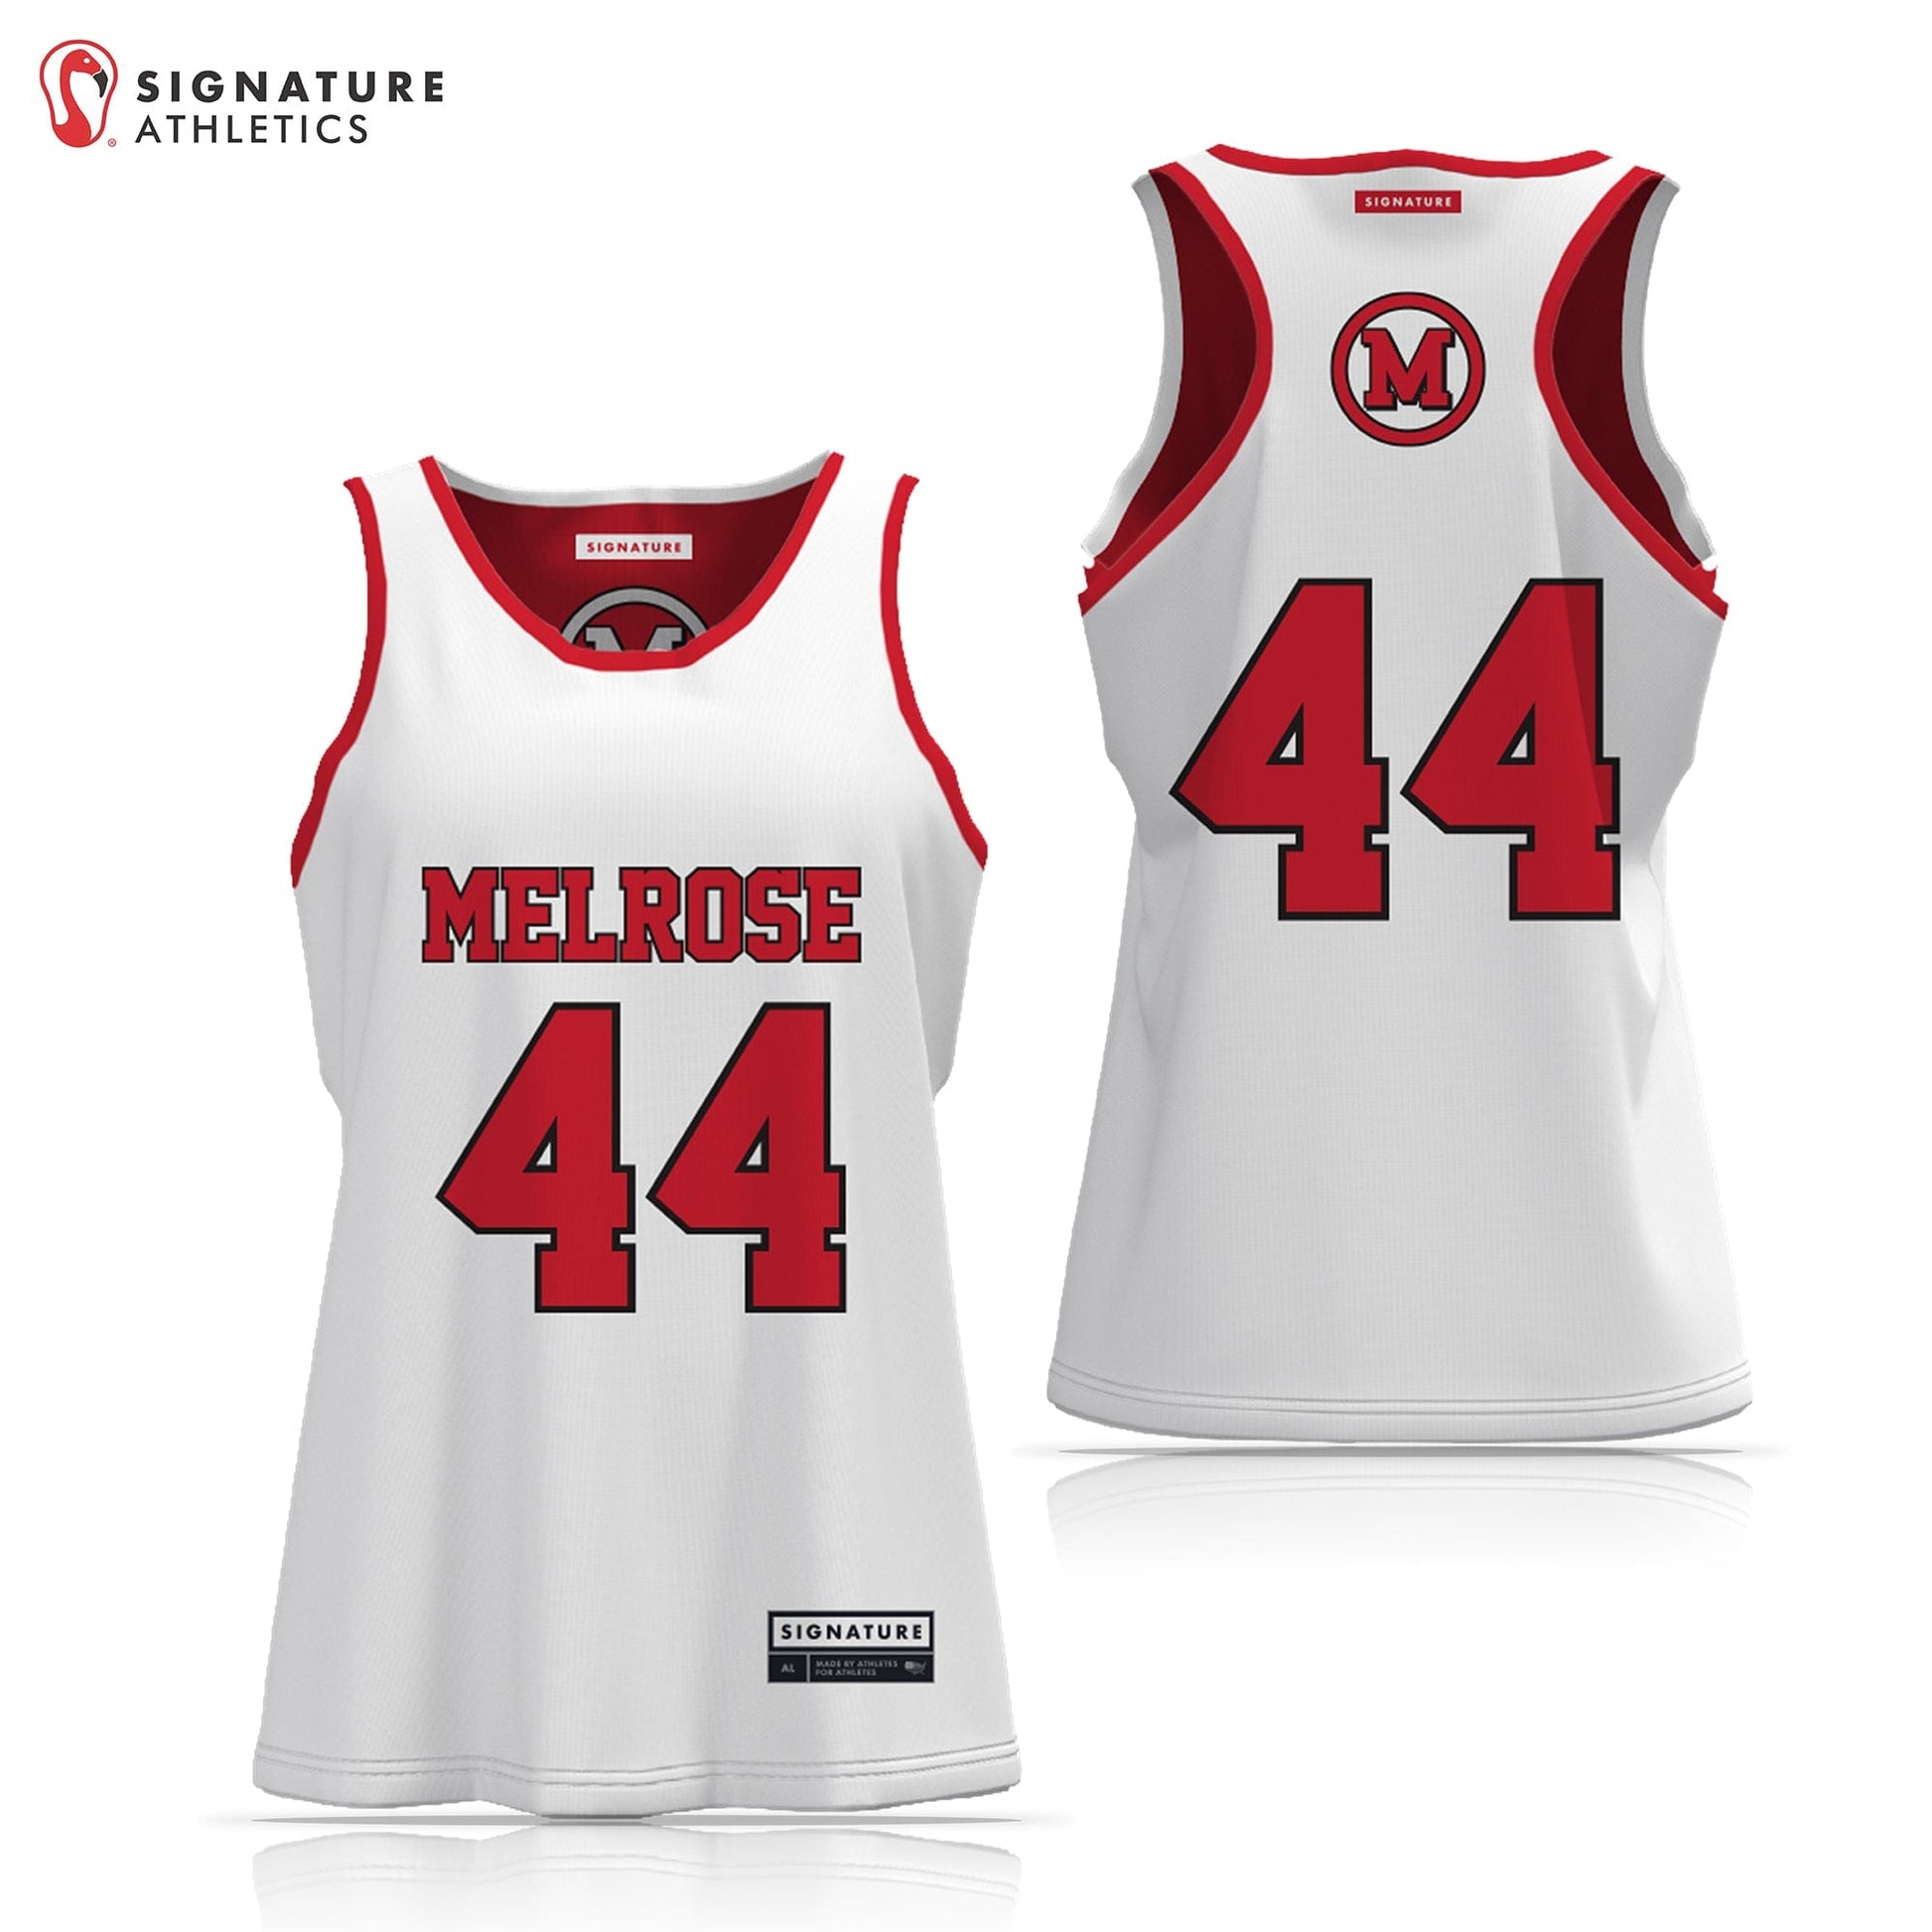 Melrose Youth Lacrosse Women's 2 Piece Player Game Package Signature Lacrosse